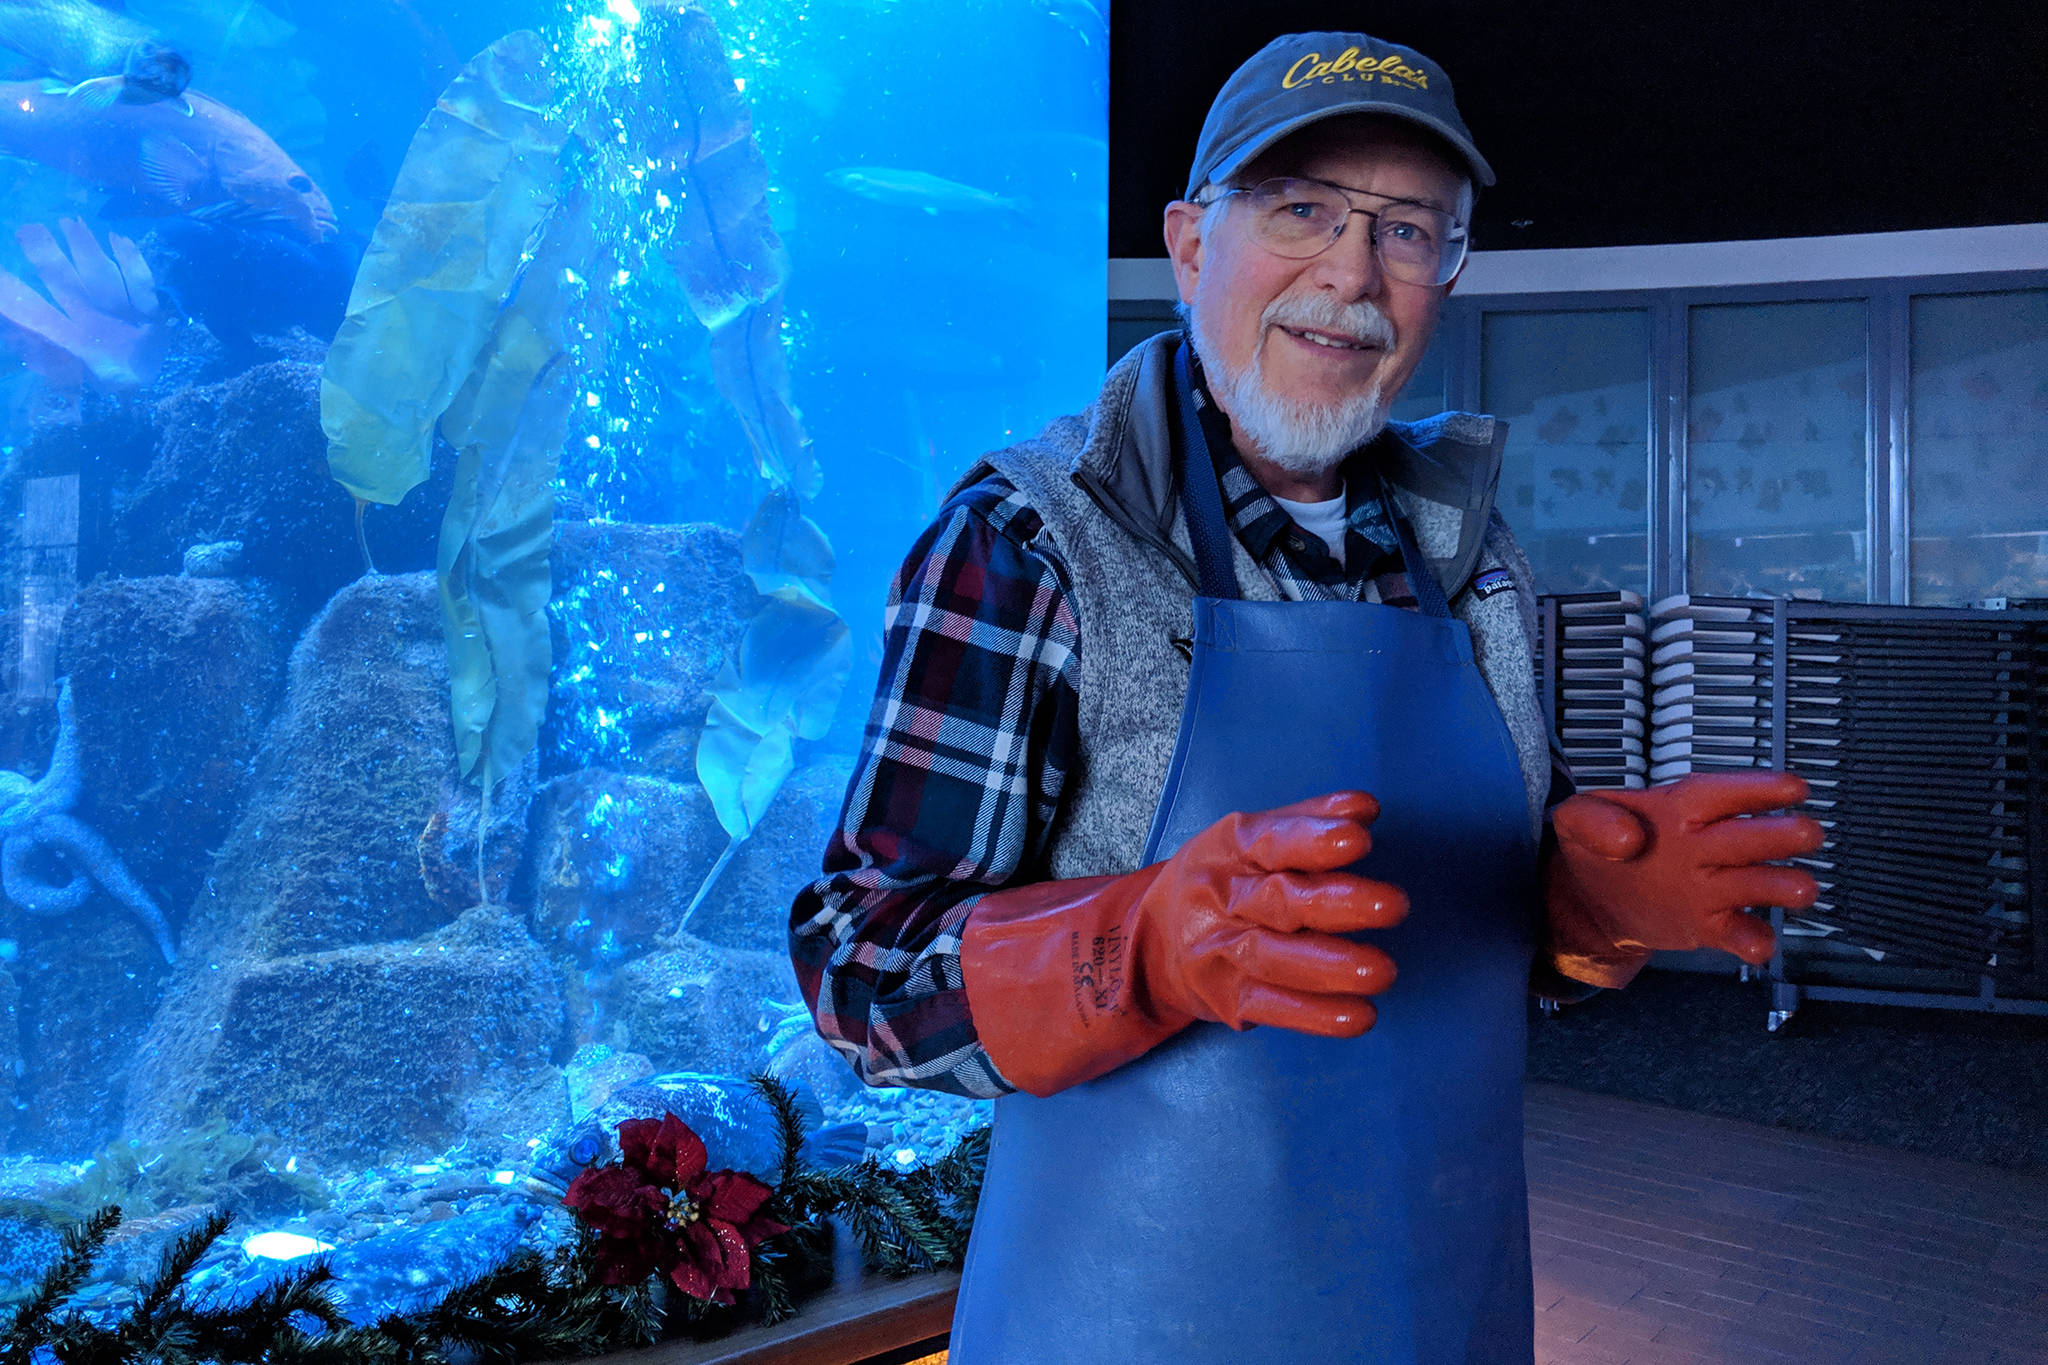 Rich Mattson, who retired after nearly 31 years with Douglas Island Pink And Chum, smiles while recalling an earlier engagement with a giant pacific octopus during his last shift, Dec. 24, 2018. (Ben Hohenstatt | Capital City Weekly)